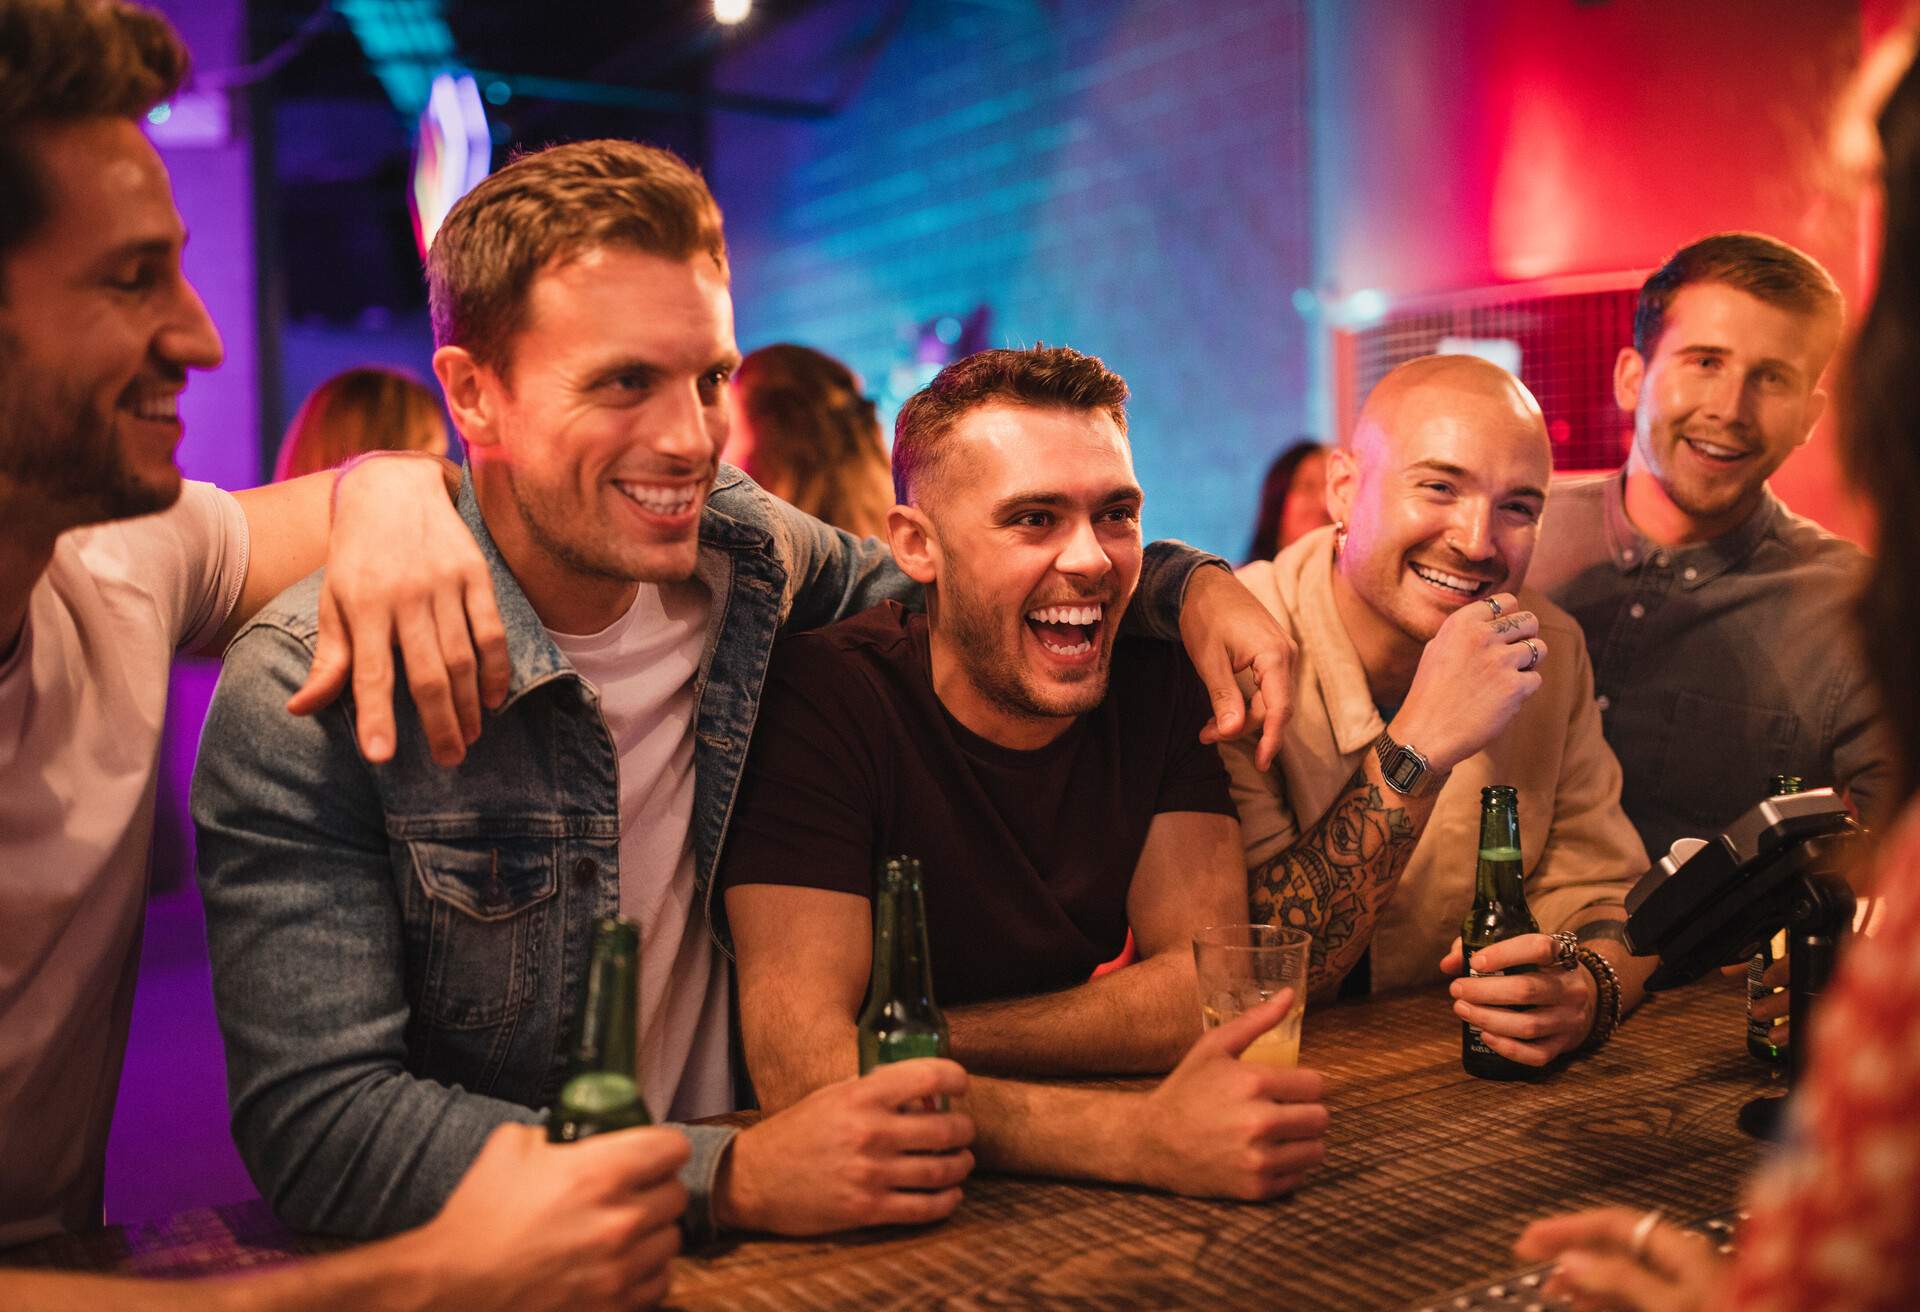 THEME_NIGHTLIFE_BAR_GROUP_OF_MEN_BUYING_DRINKS_GettyImages-1053840410